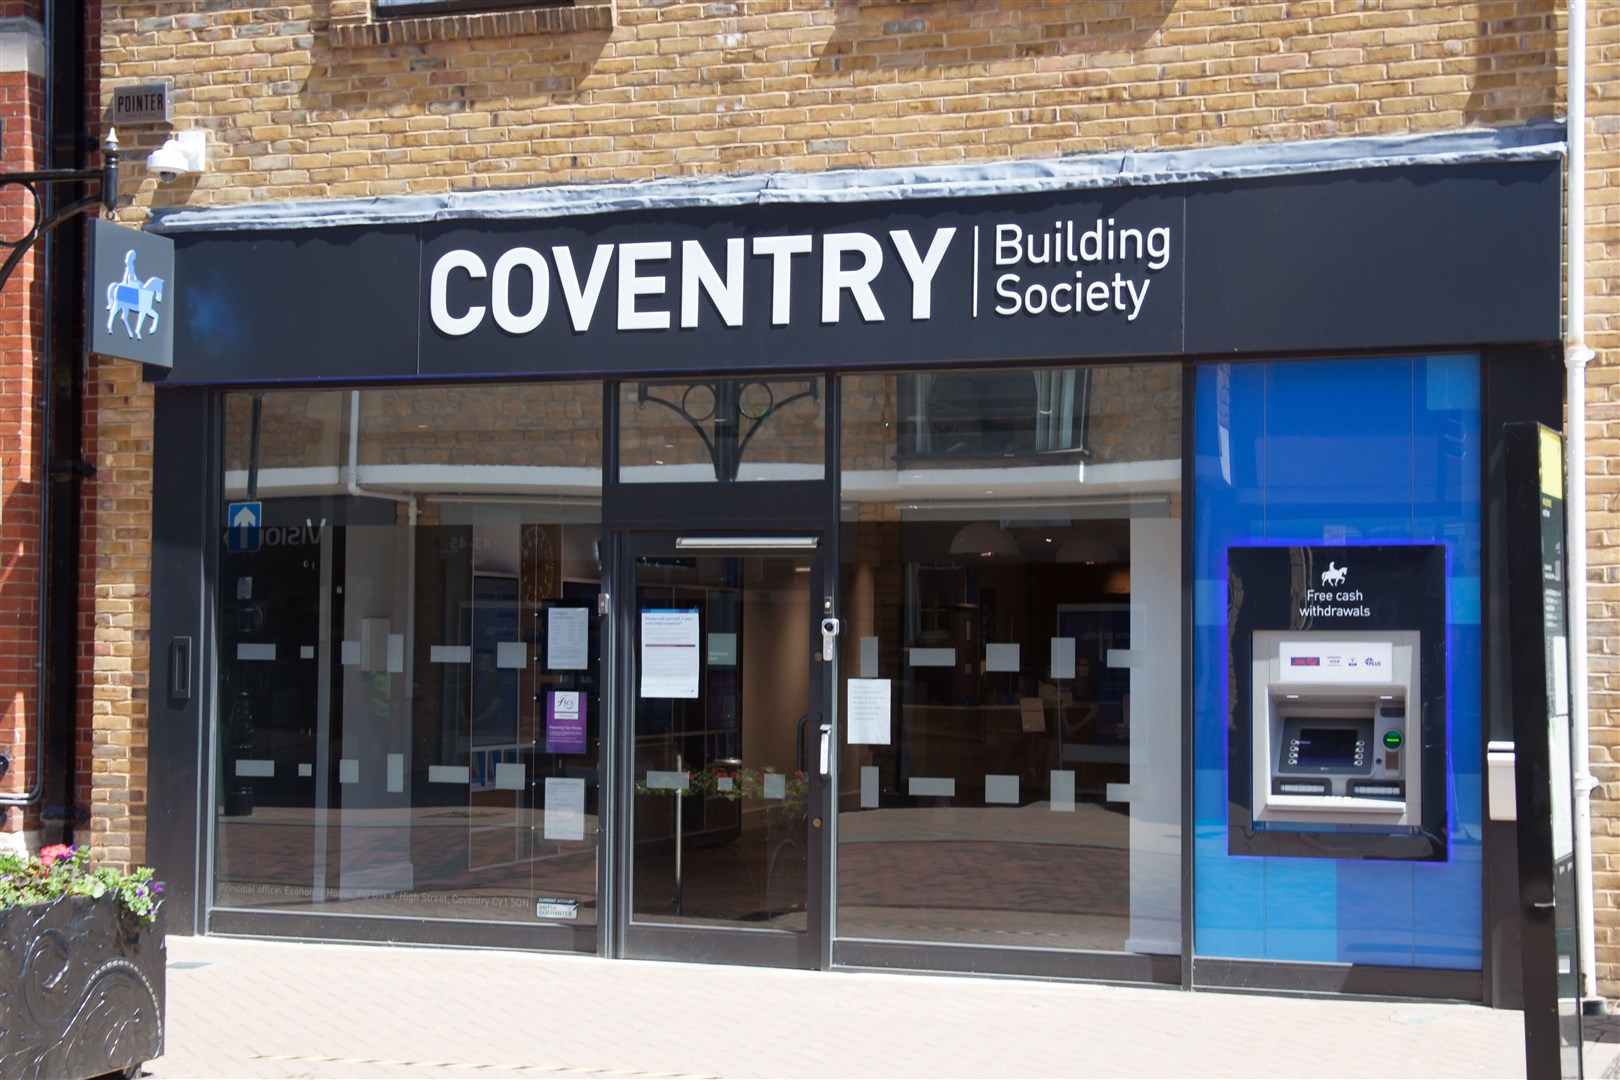 Coventry Building Society said it wants Co-op Bank’s customers to eventually become its members (PA)